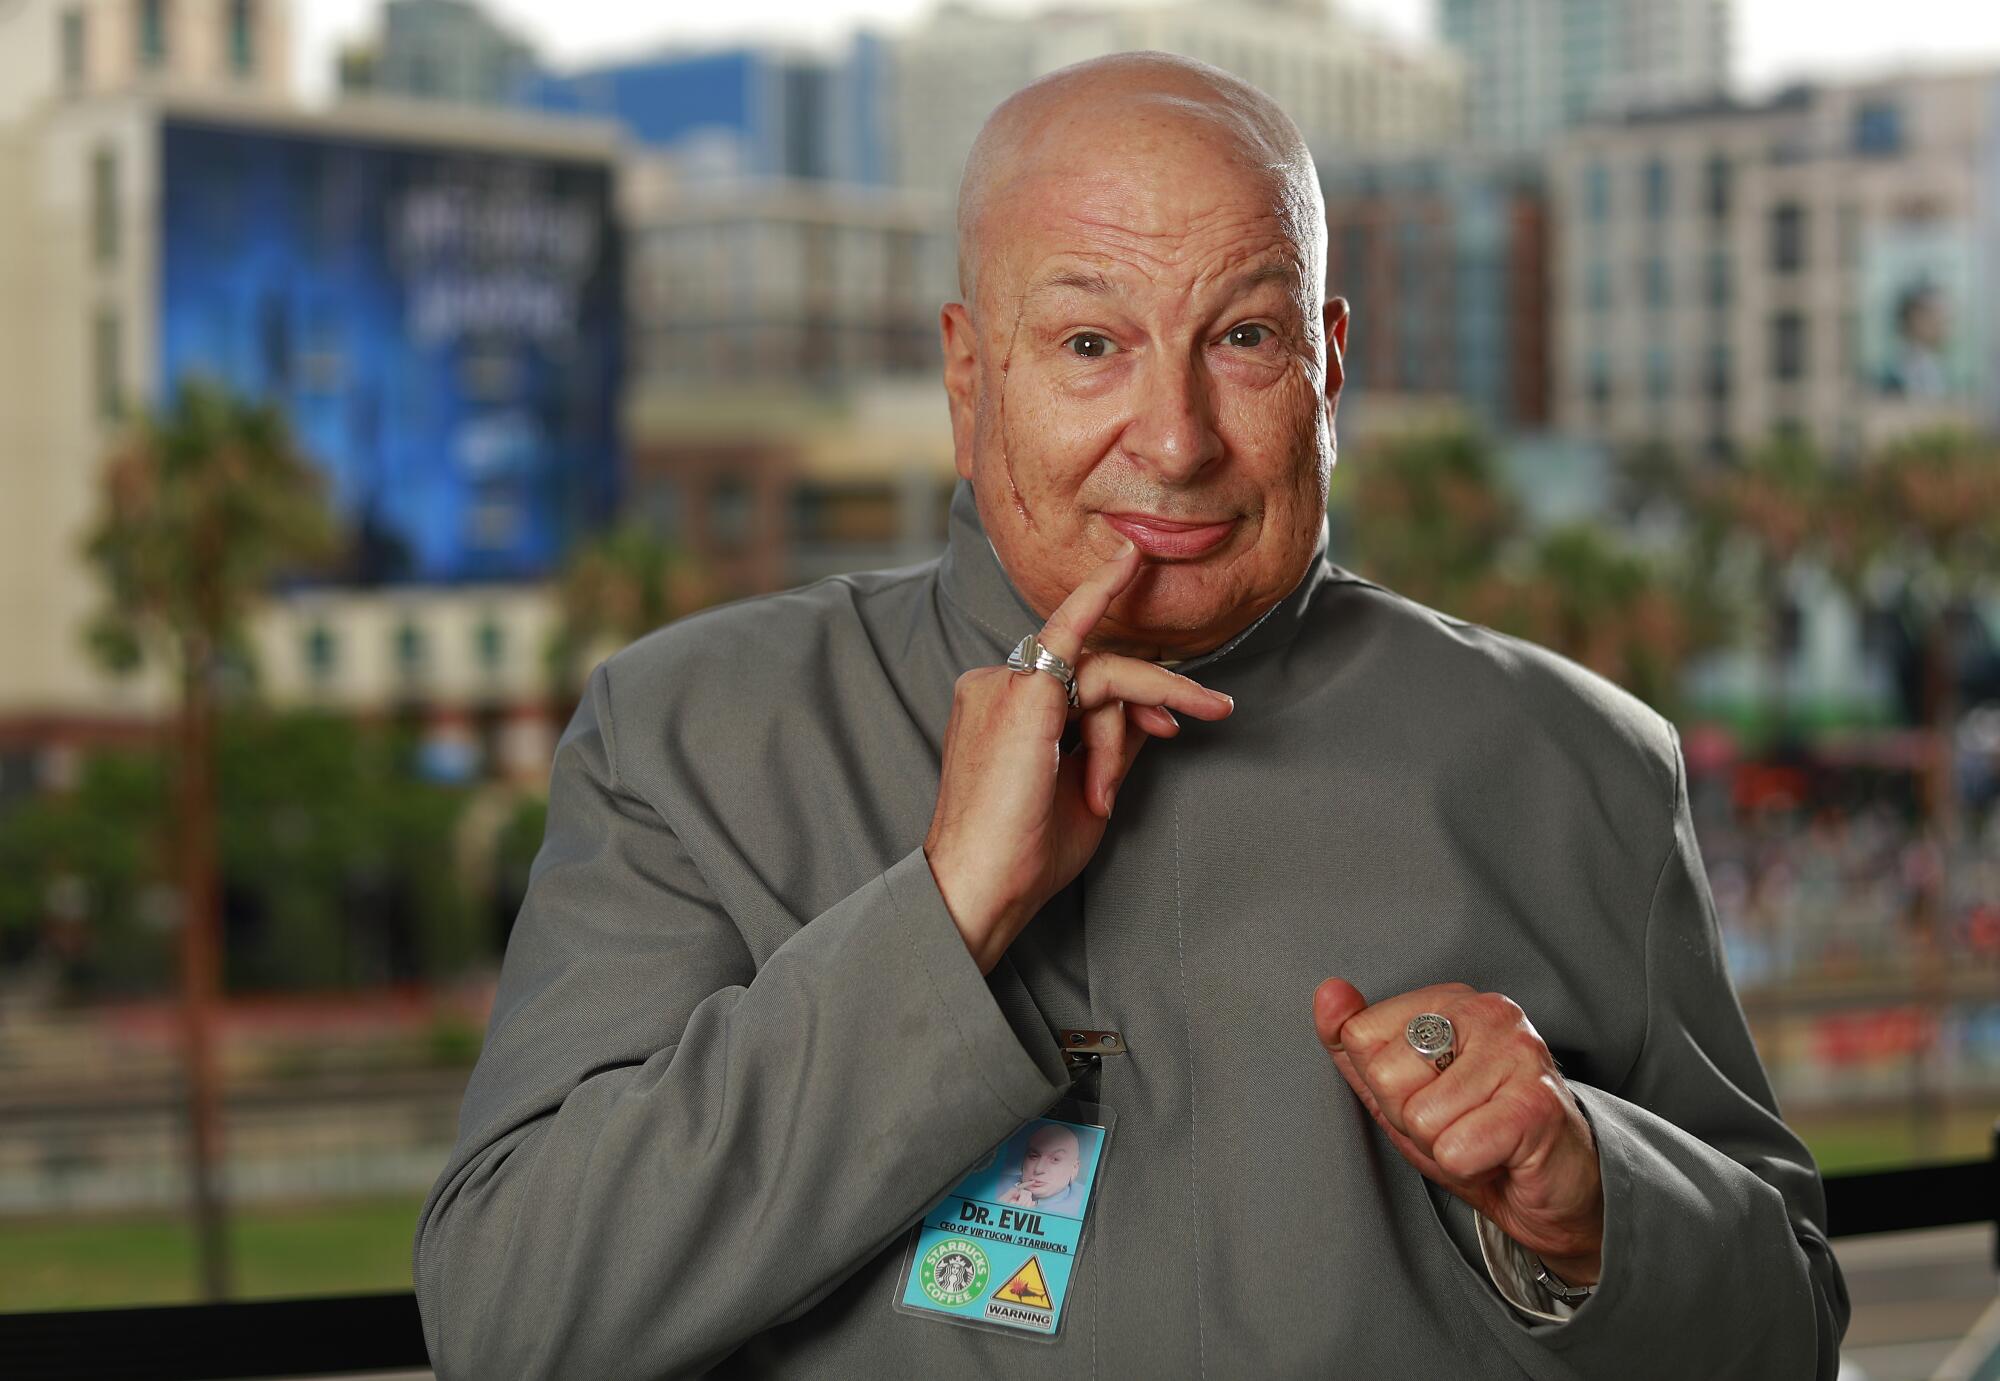 Carl Newell of San Diego dressed as Dr. Evil at Comic-Con.